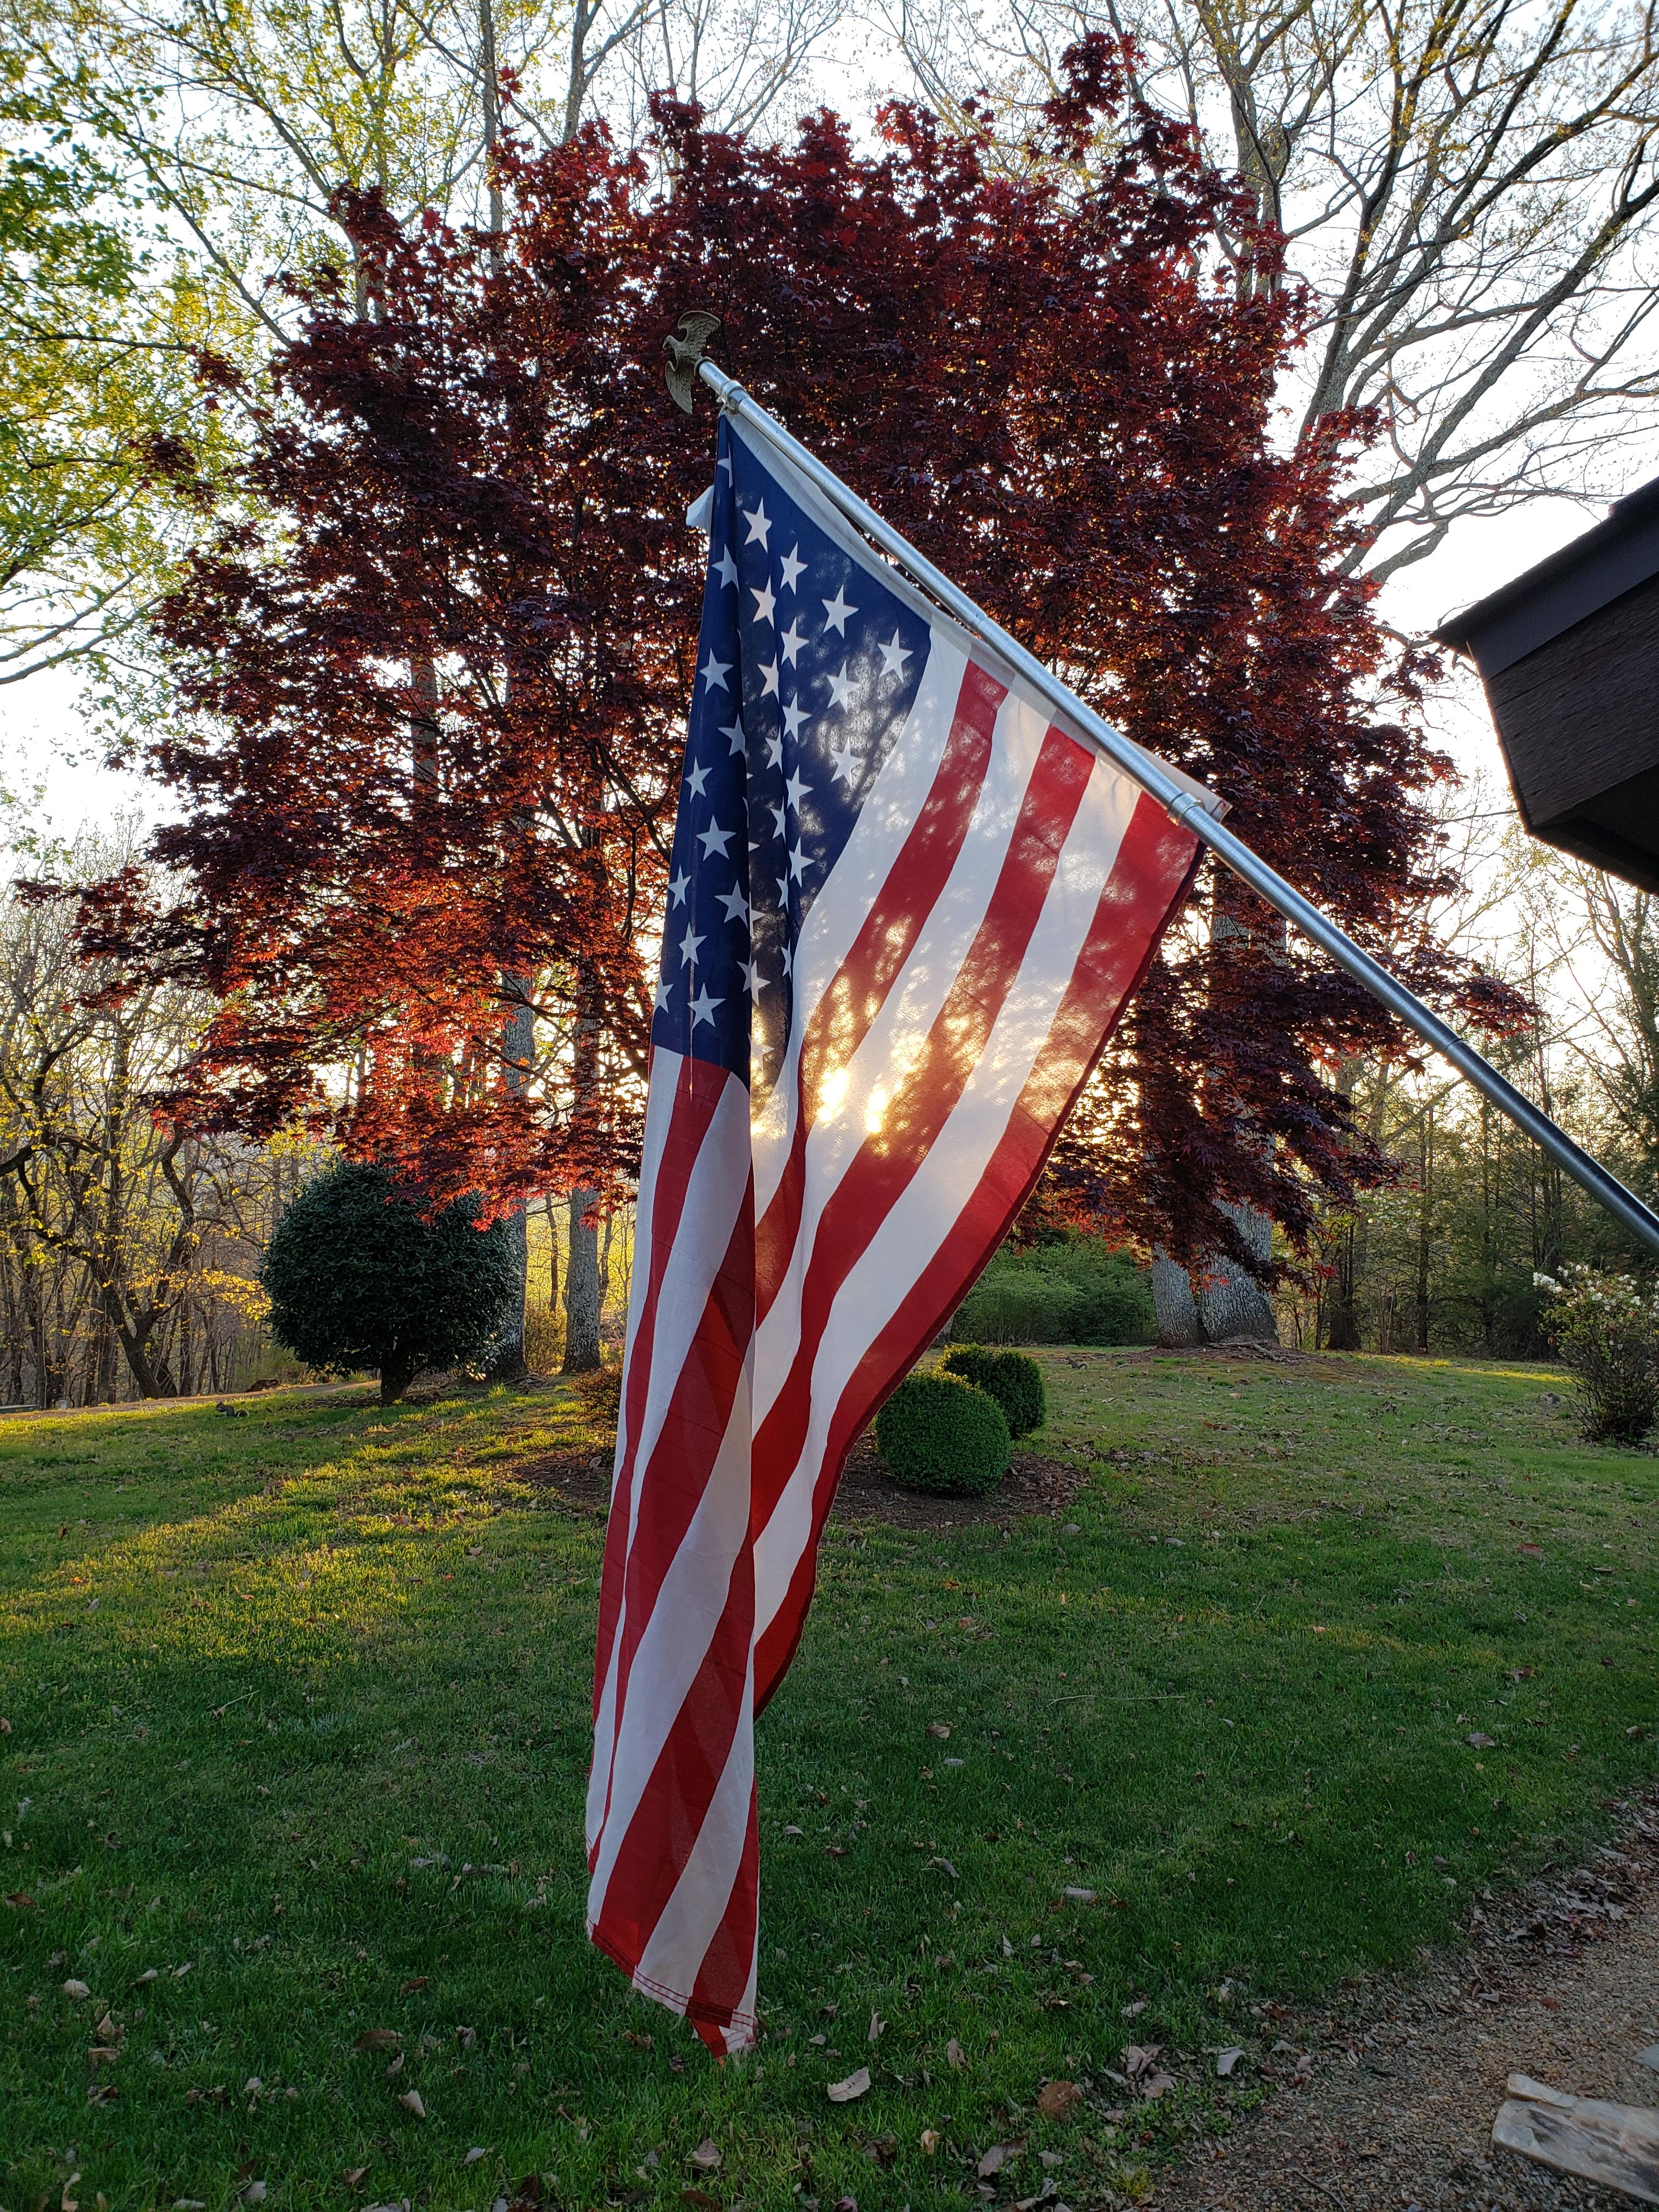 US flag with trees in setting sun. Lynn Turner